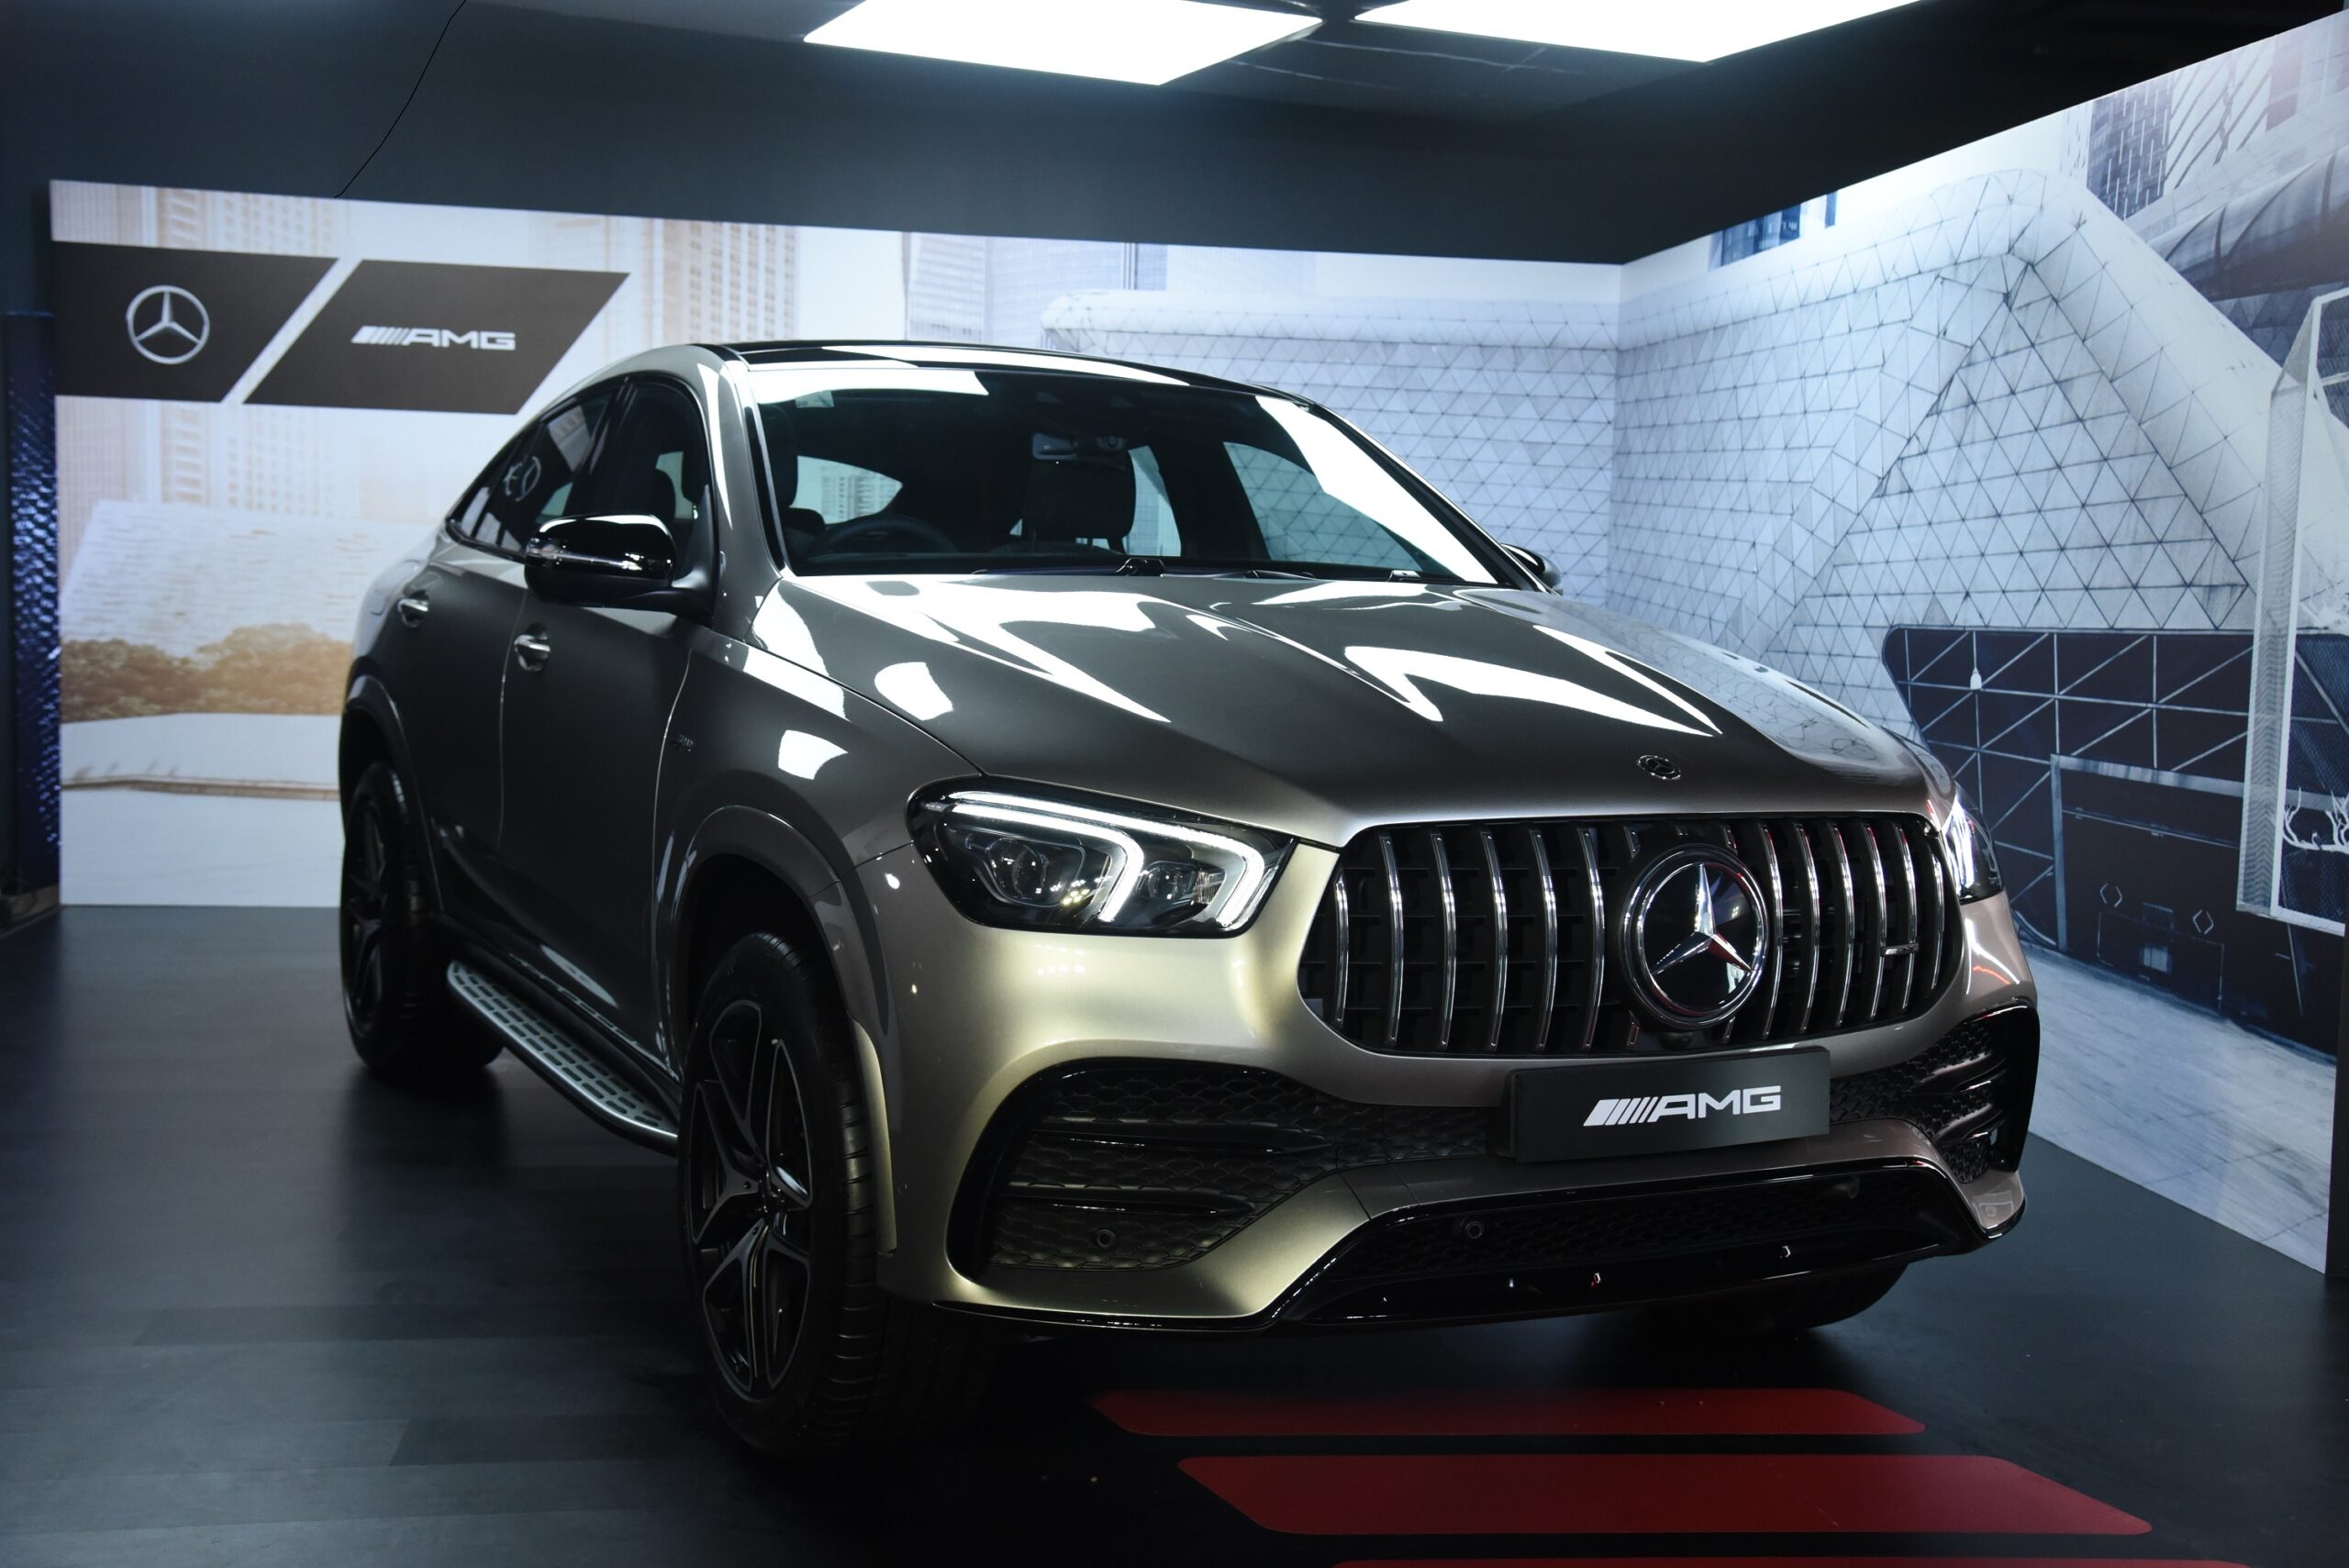 Mercedes Benz Launches AMG GLE 53 4MATIC Coupe SUV at Rs 1 20 Crores 